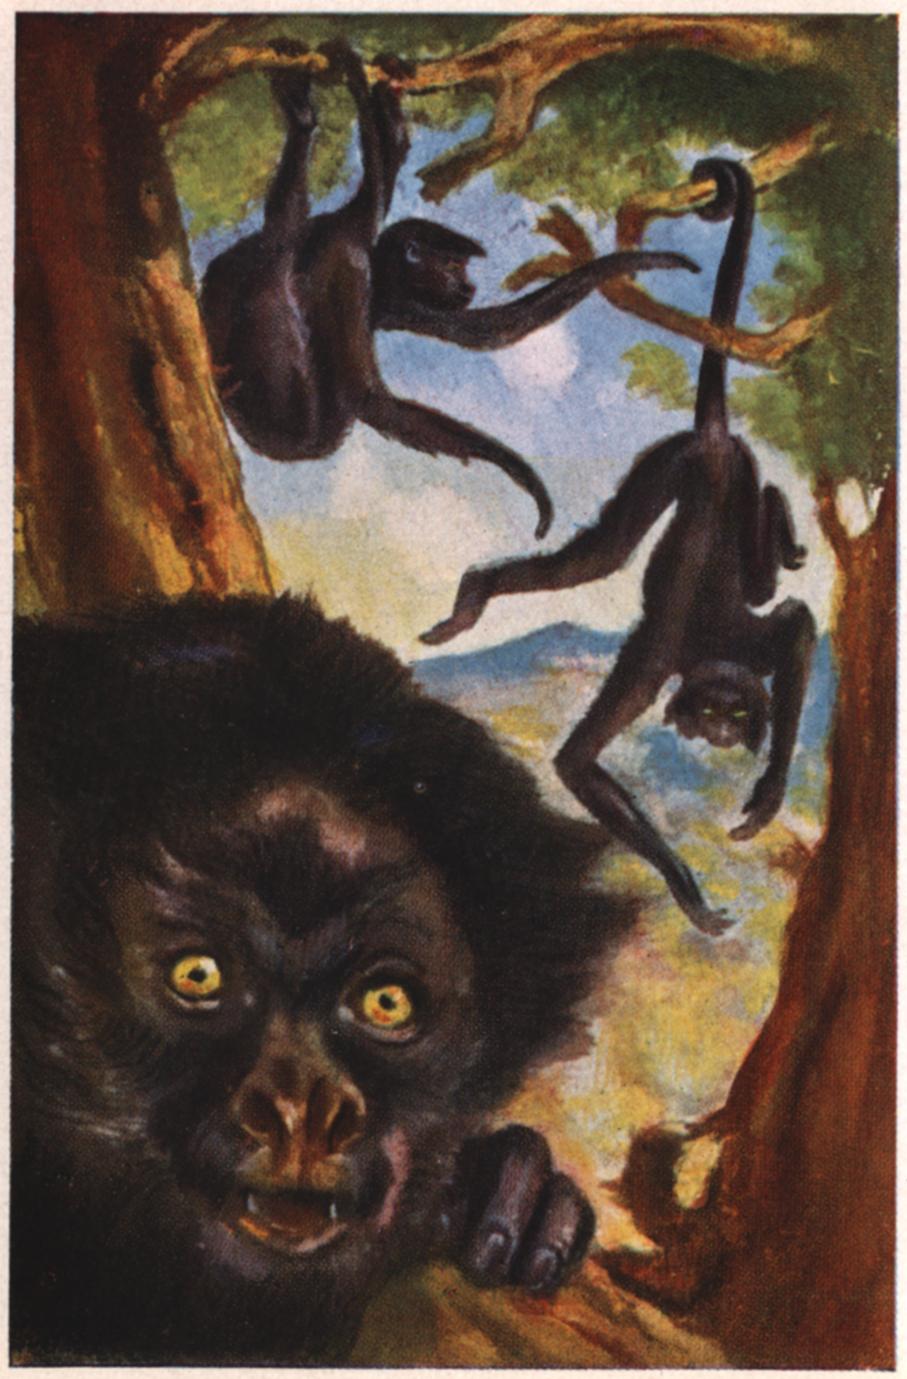 Climbing Red-Faced Spider Monkeys Print